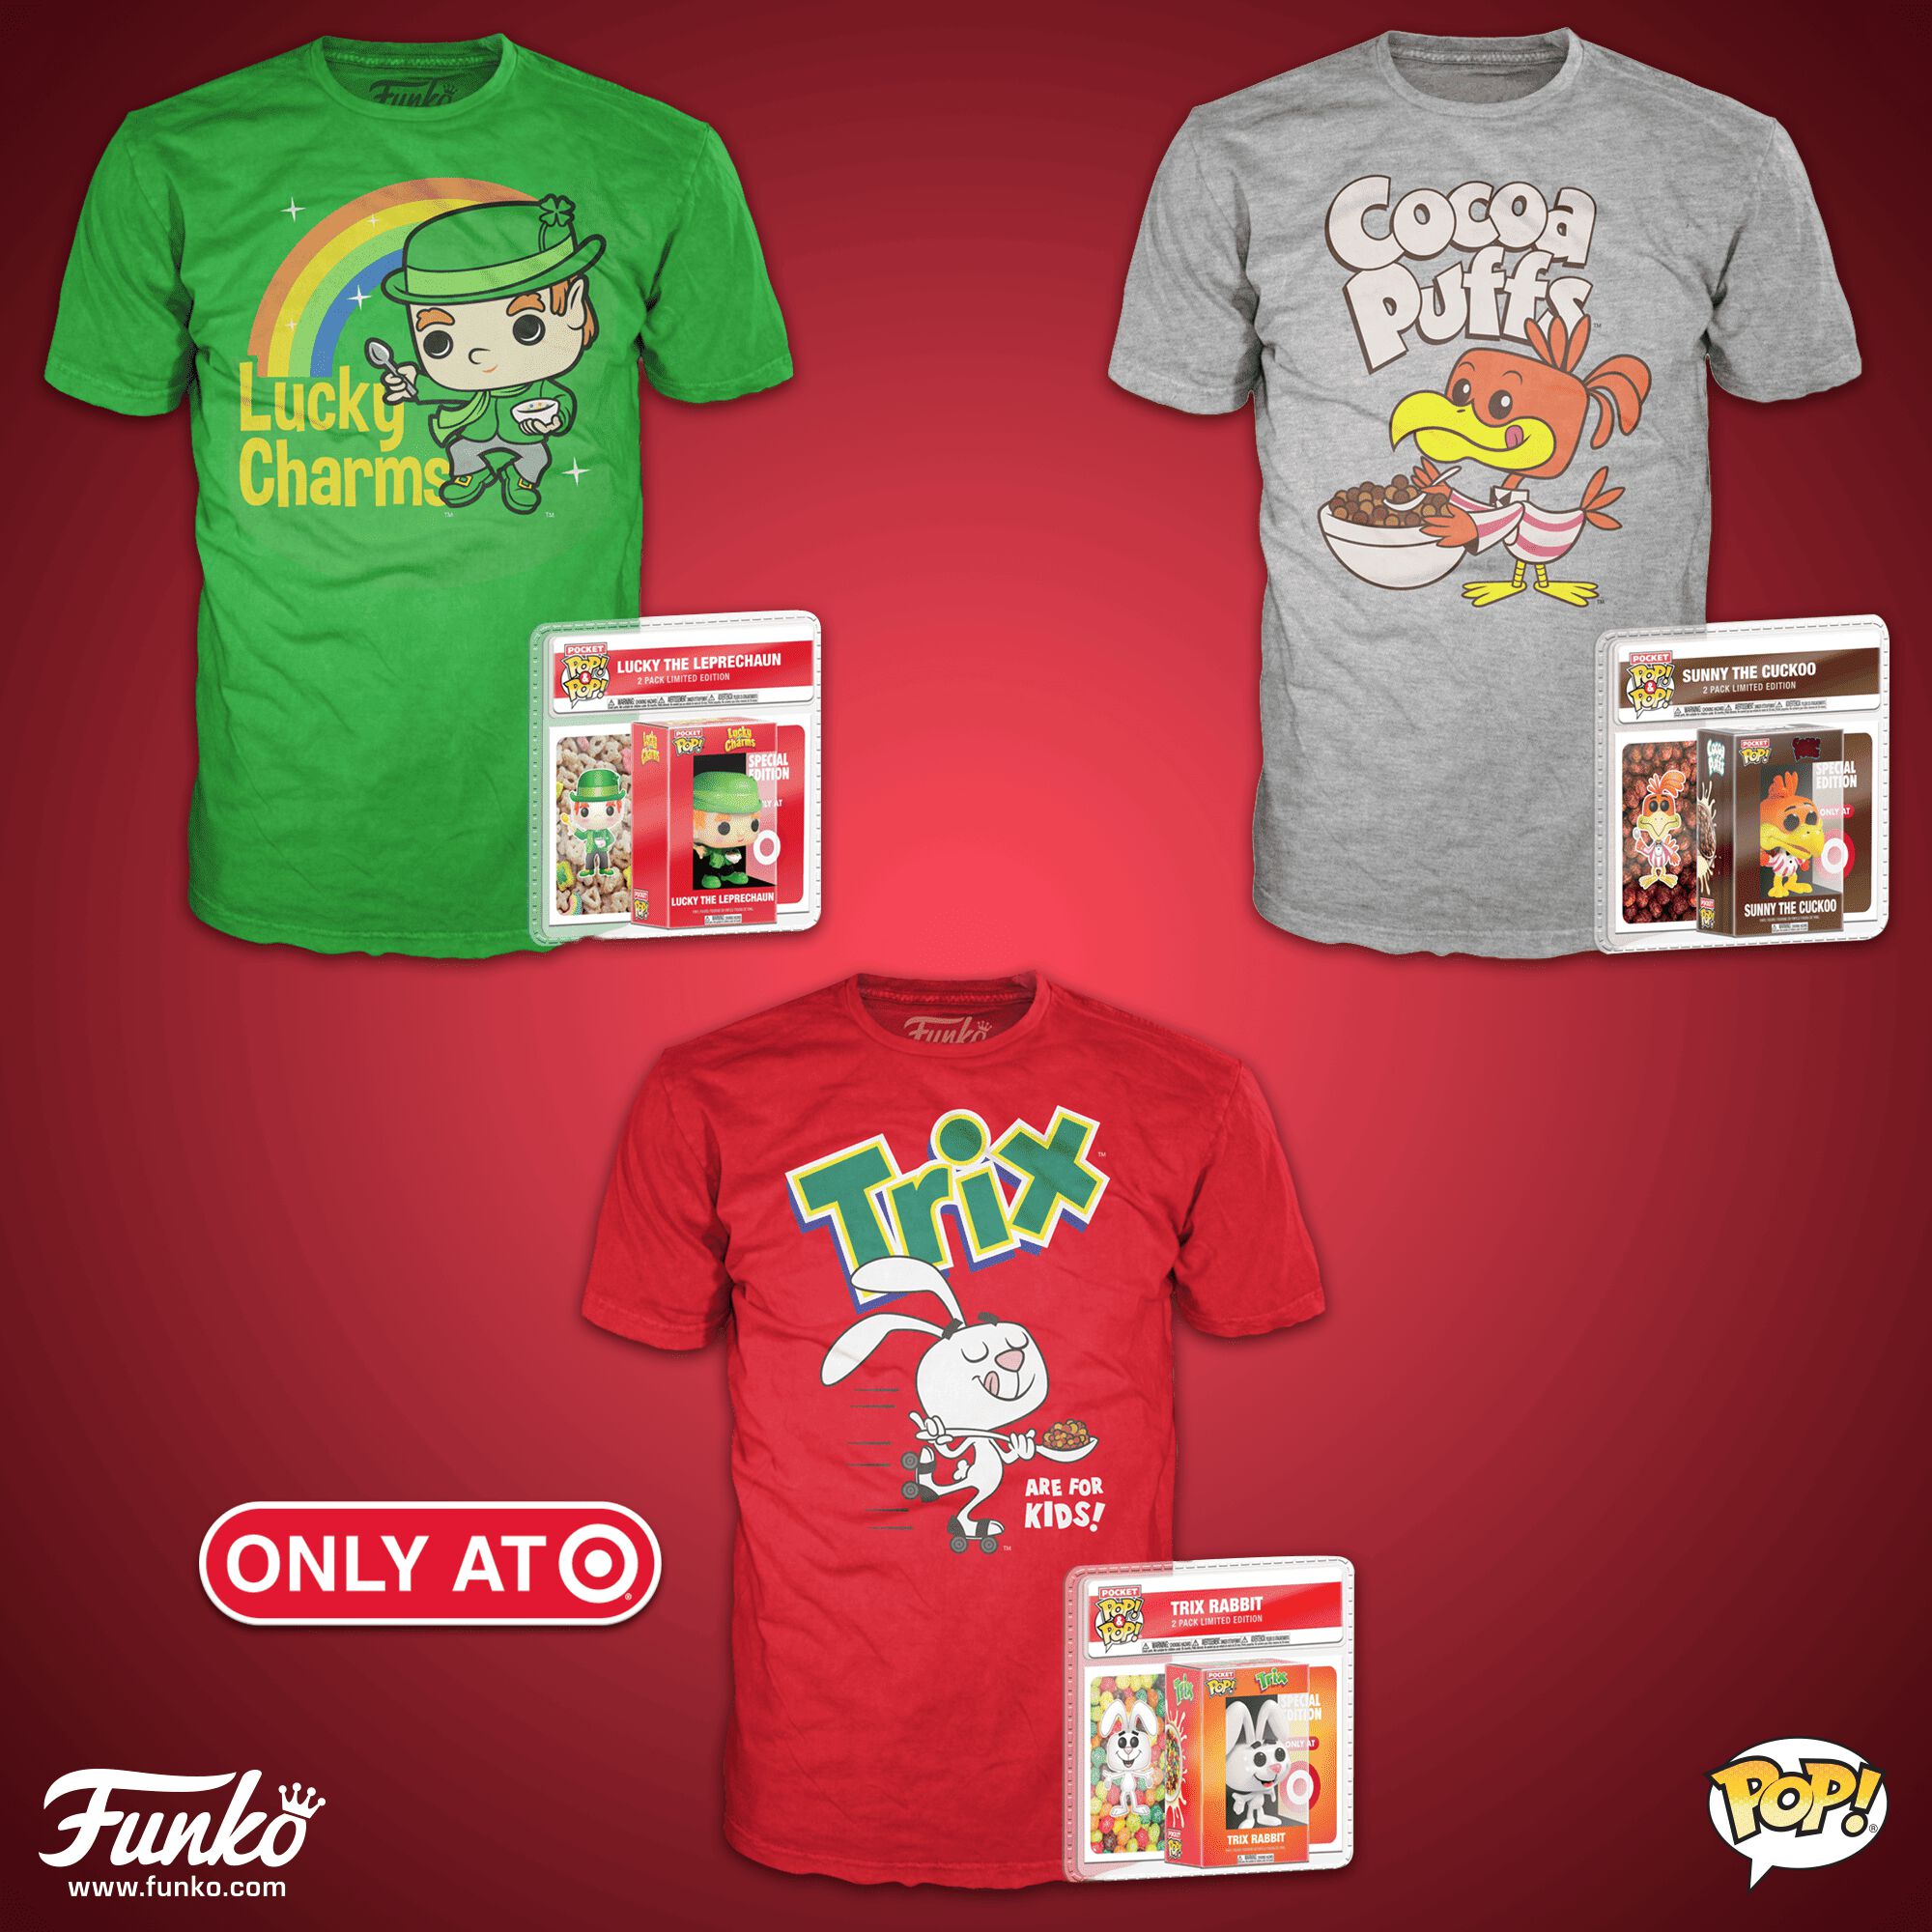 Available now: Target Exclusive Cereal Pocket Pop! and Youth Tees!